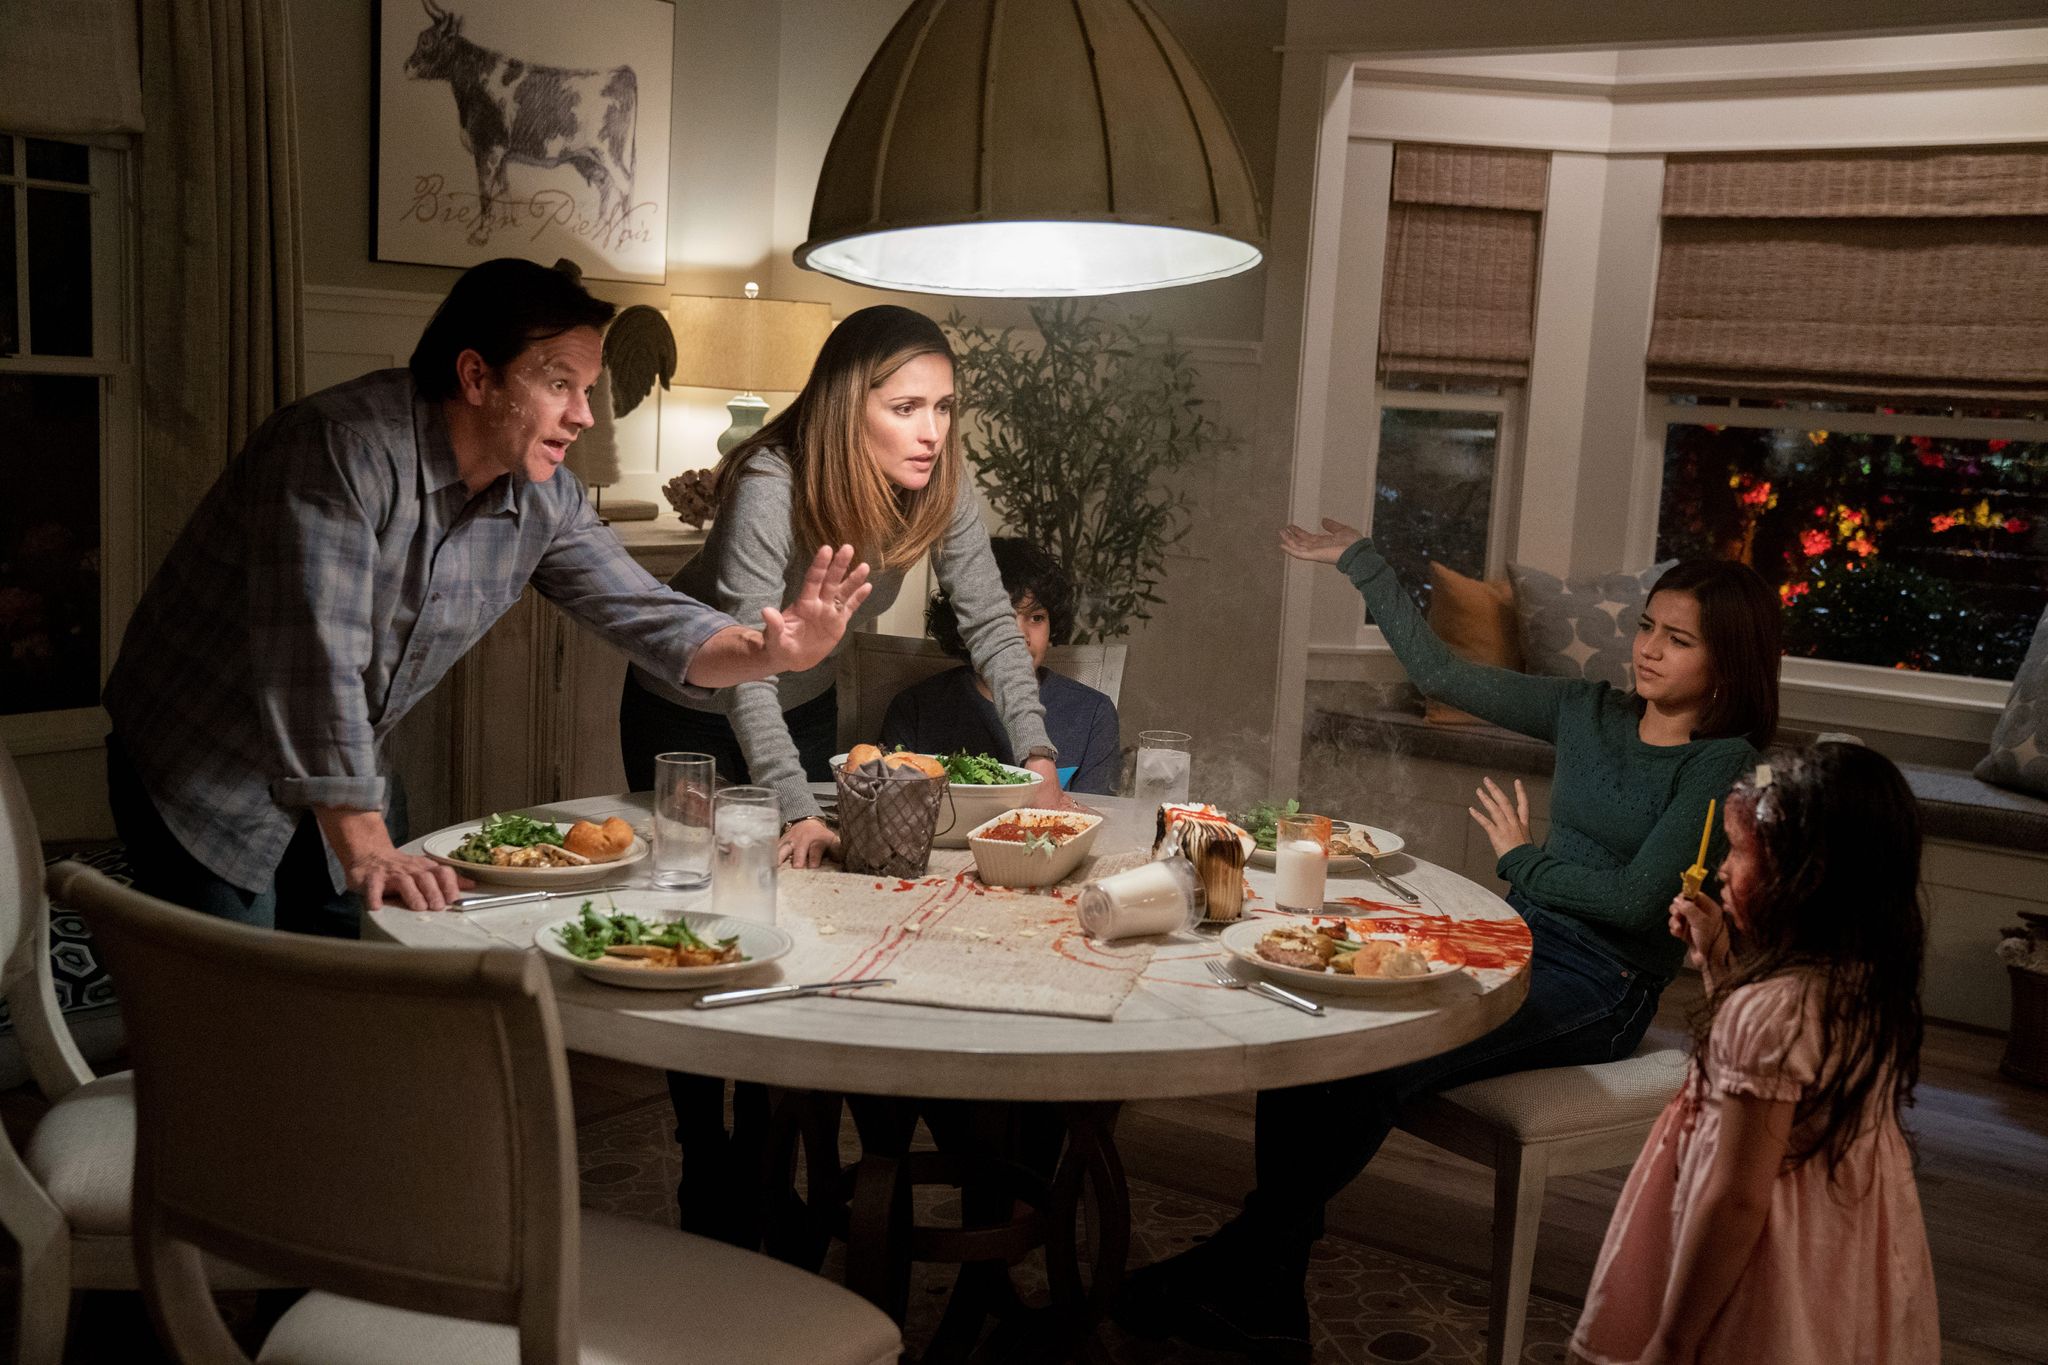 Film Review: Instant Family (USA, 2018) is an instant failure, despite